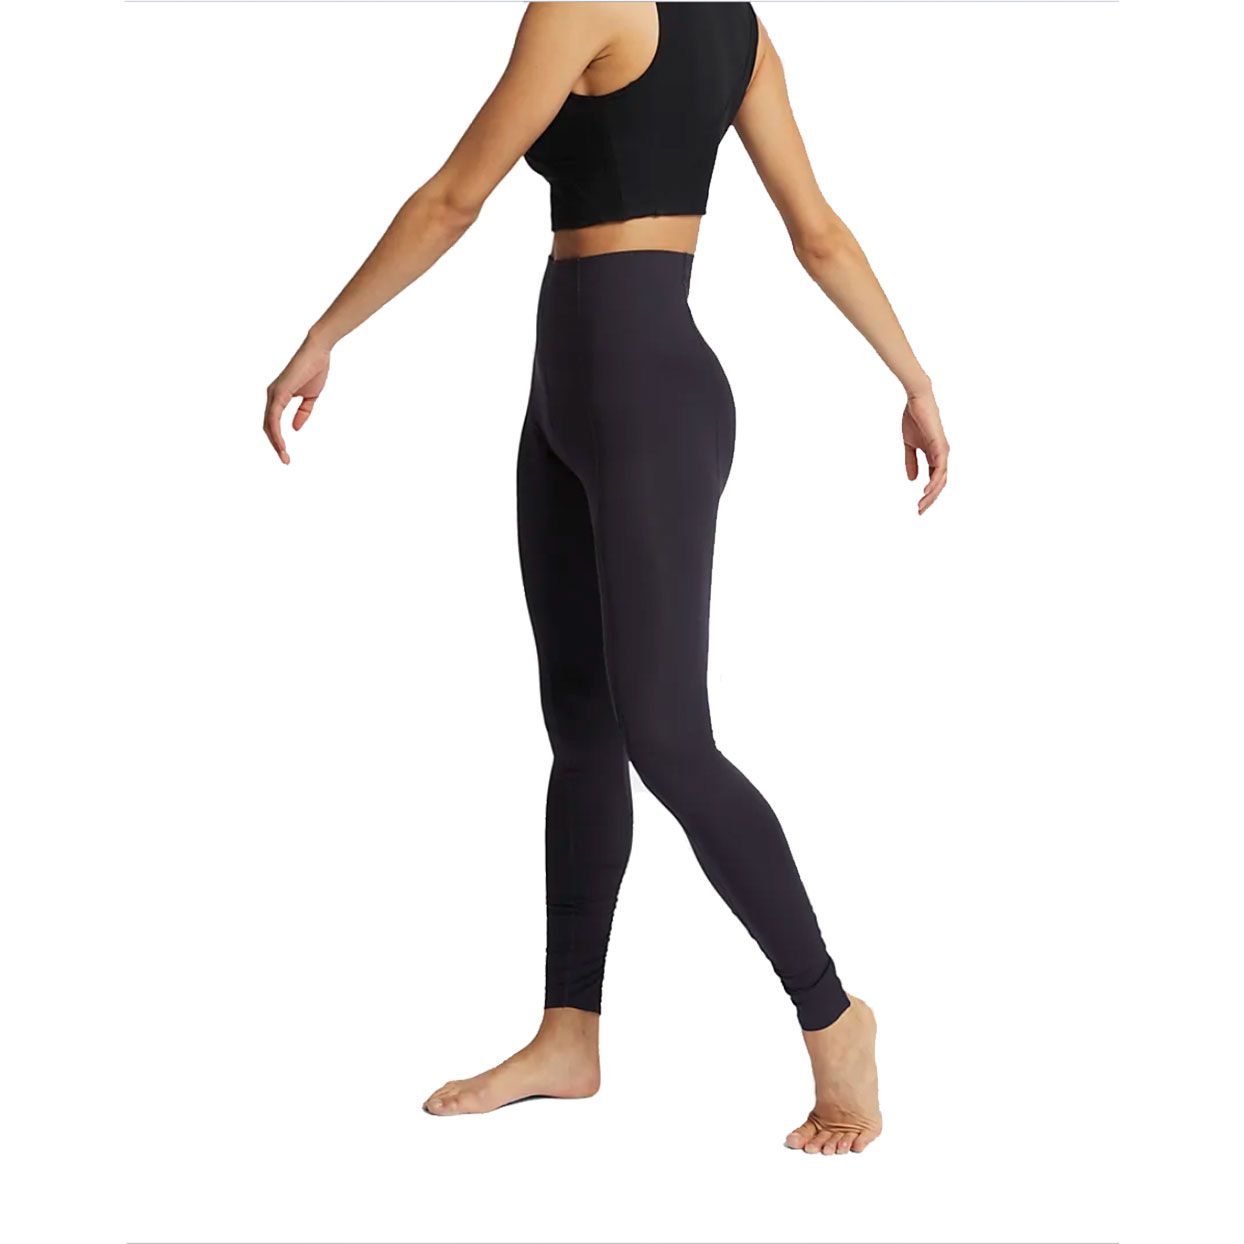 TONGLAI Womens High Waist Compression Yoga Pants Power Stretch Tummy Control Leggings for Running Workout with Pockets 